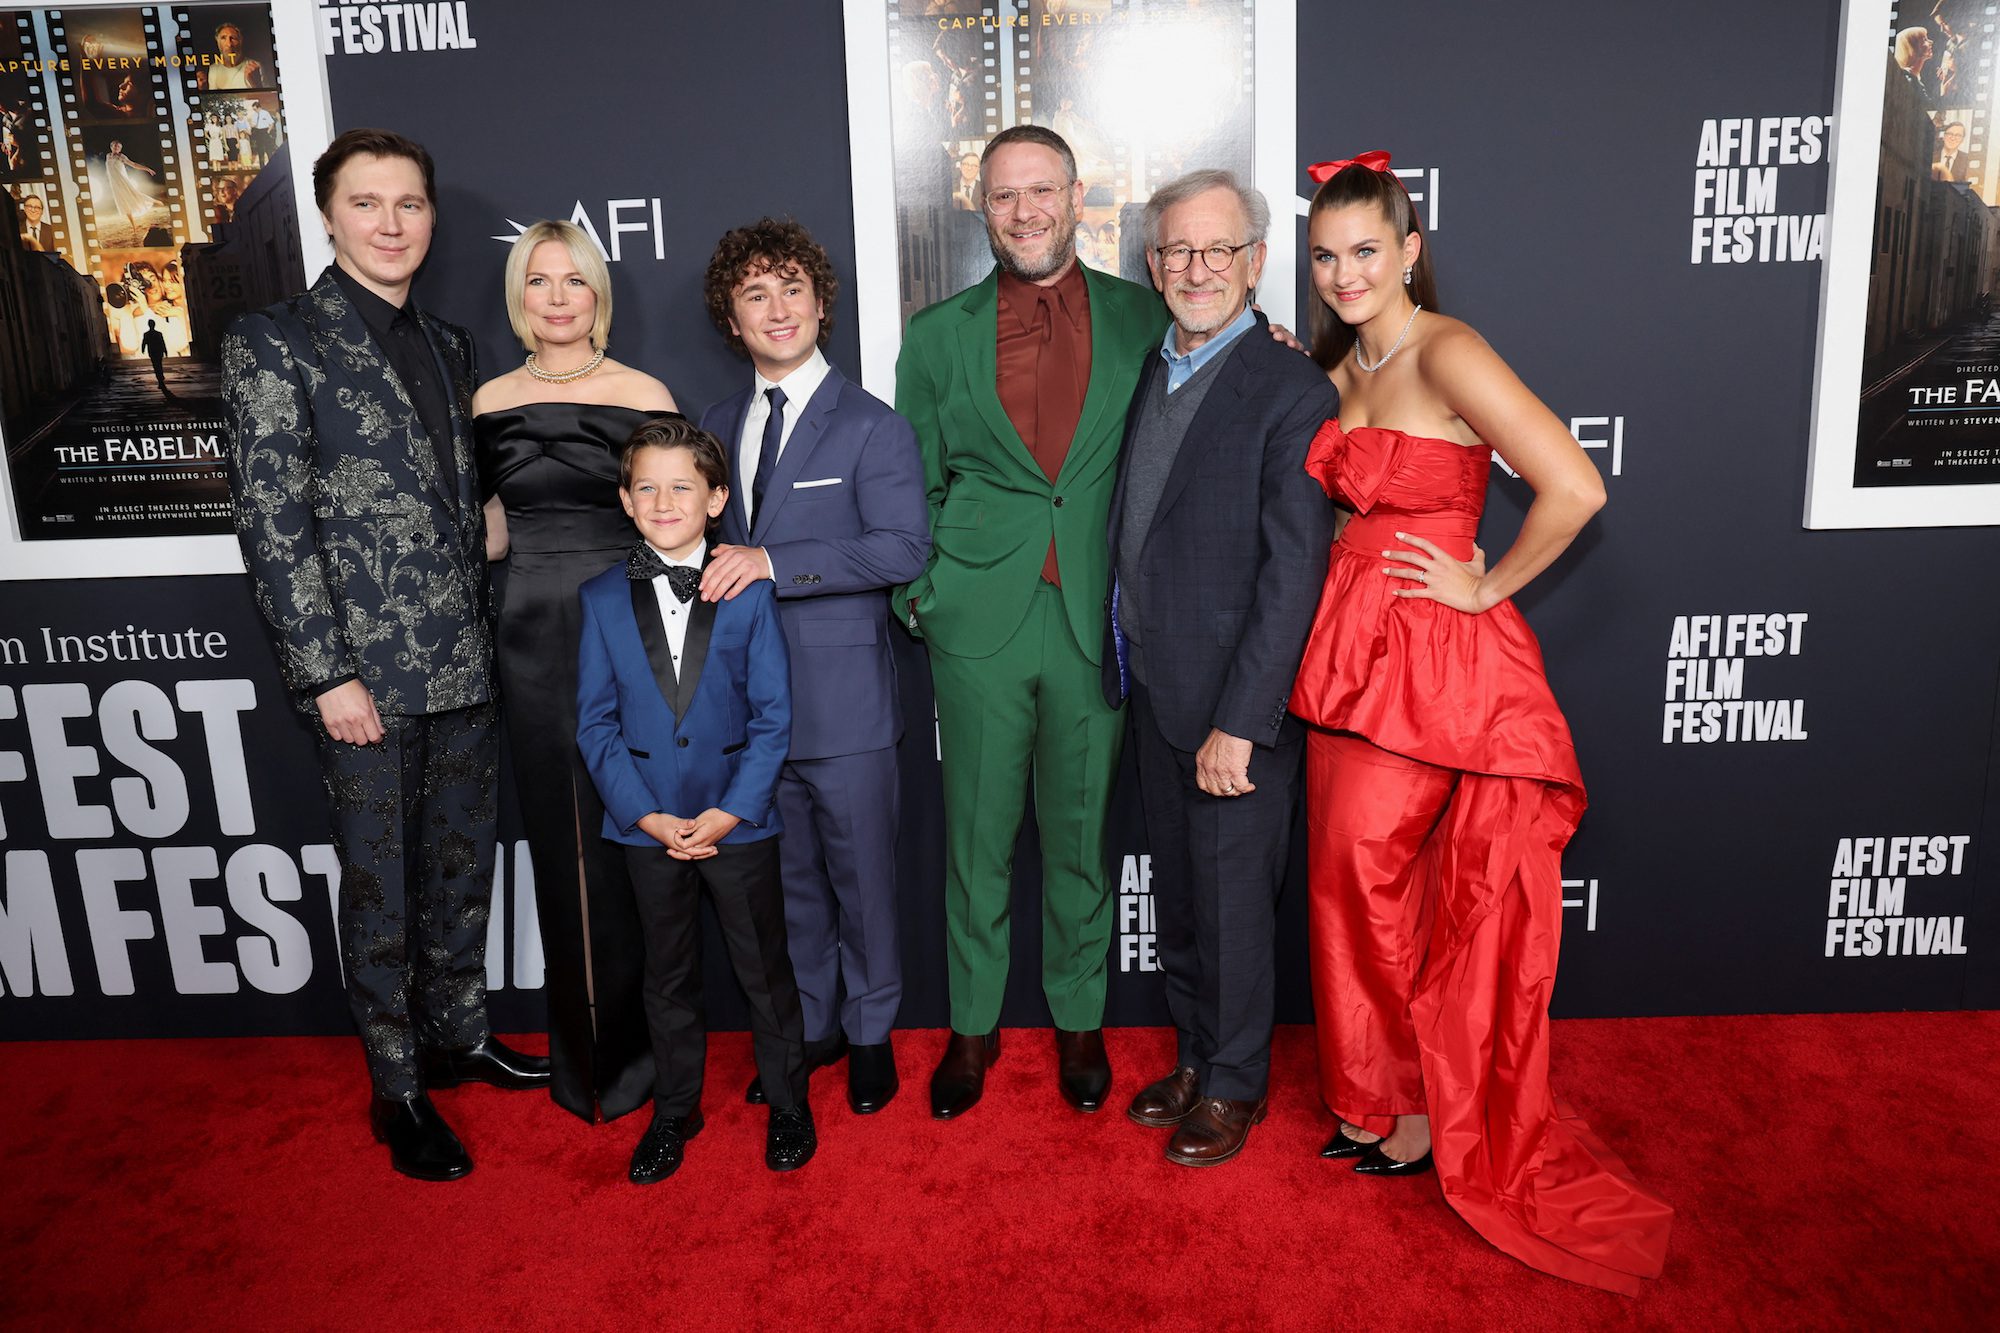 Director Steven Spielberg, cast members Michelle Williams, Paul Dano, Mateo Zoryon Francis-DeFord, Gabriel LaBelle, Seth Rogen and Chloe East attend a premiere for the film "The Fabelmans" during the AFI Fest in Los Angeles, California, U.S., November 6, 2022. REUTERS/Mario Anzuoni